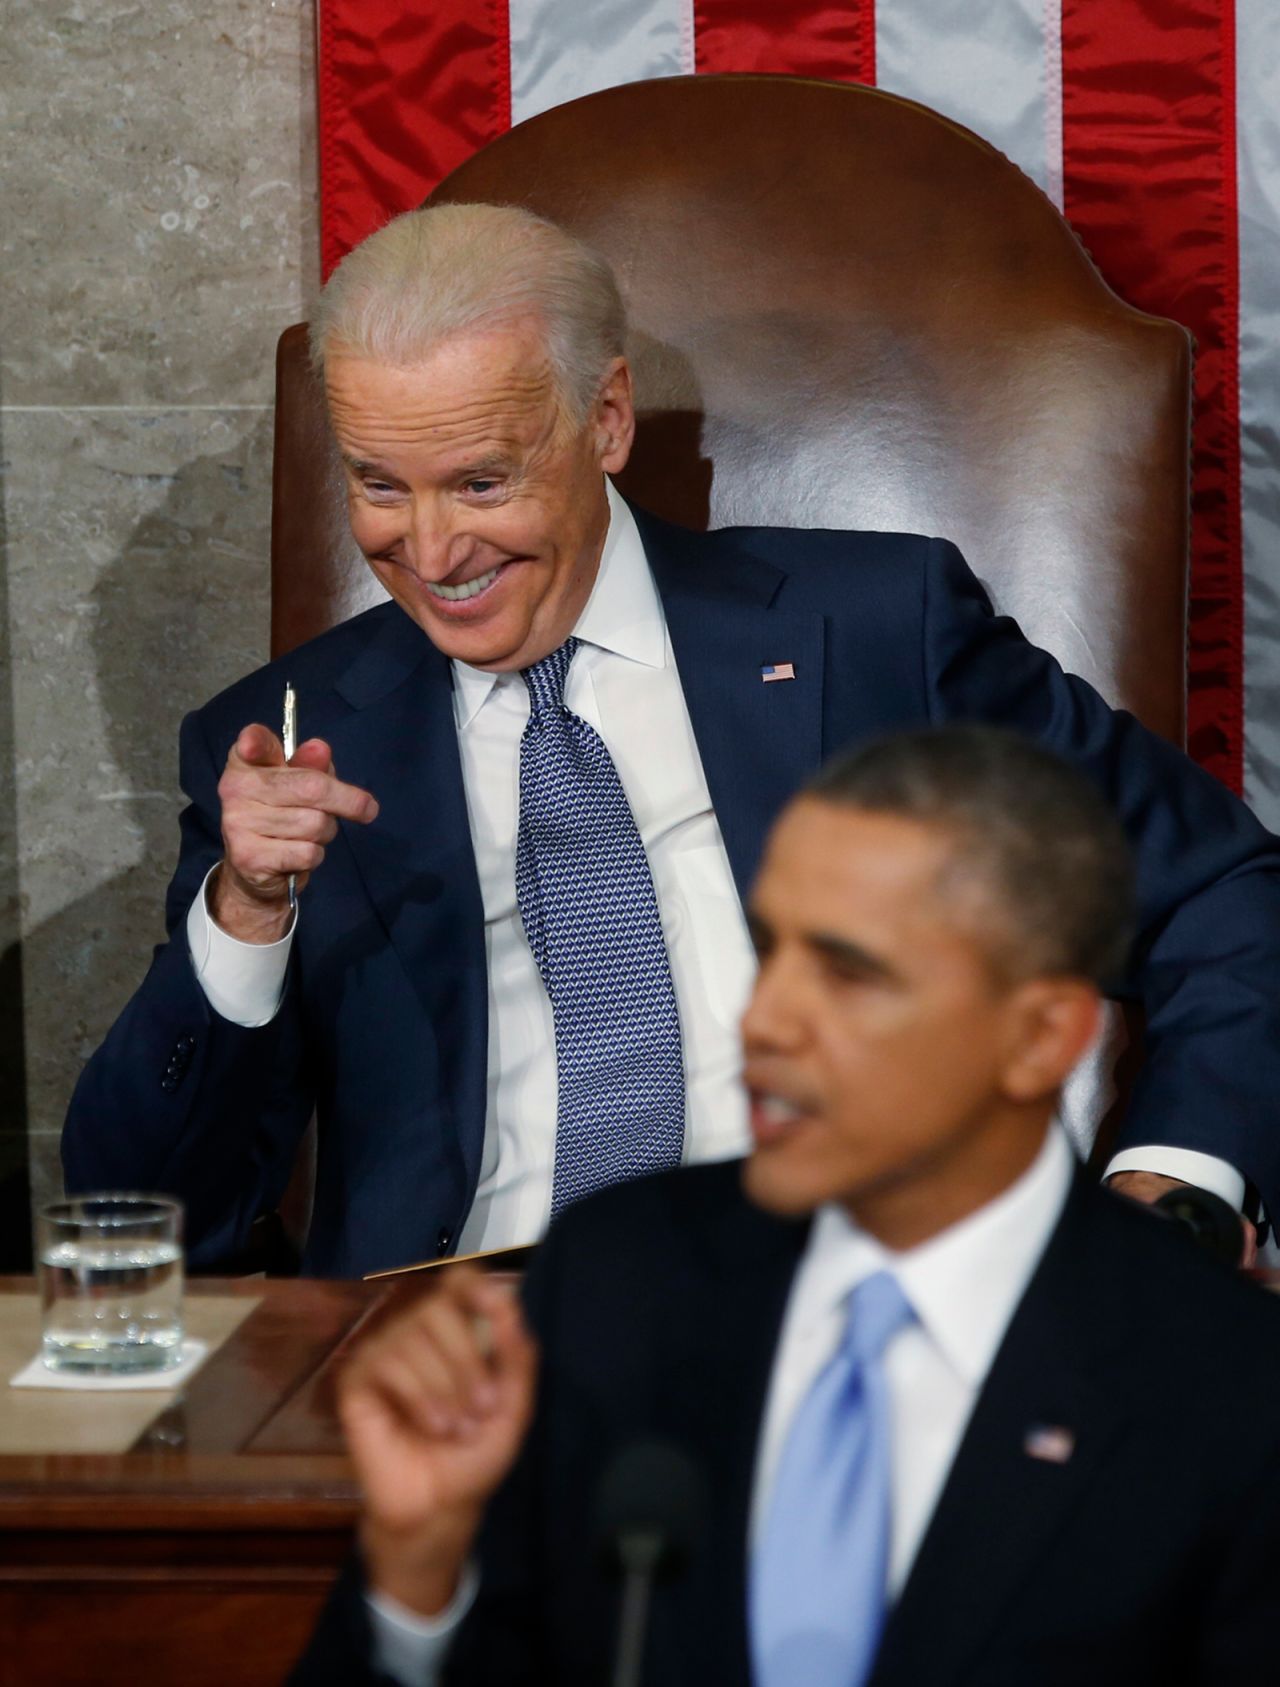 Vice President Joe Biden points and laughs as Obama gives his 2014 address. The "finger guns" image quickly became a meme.